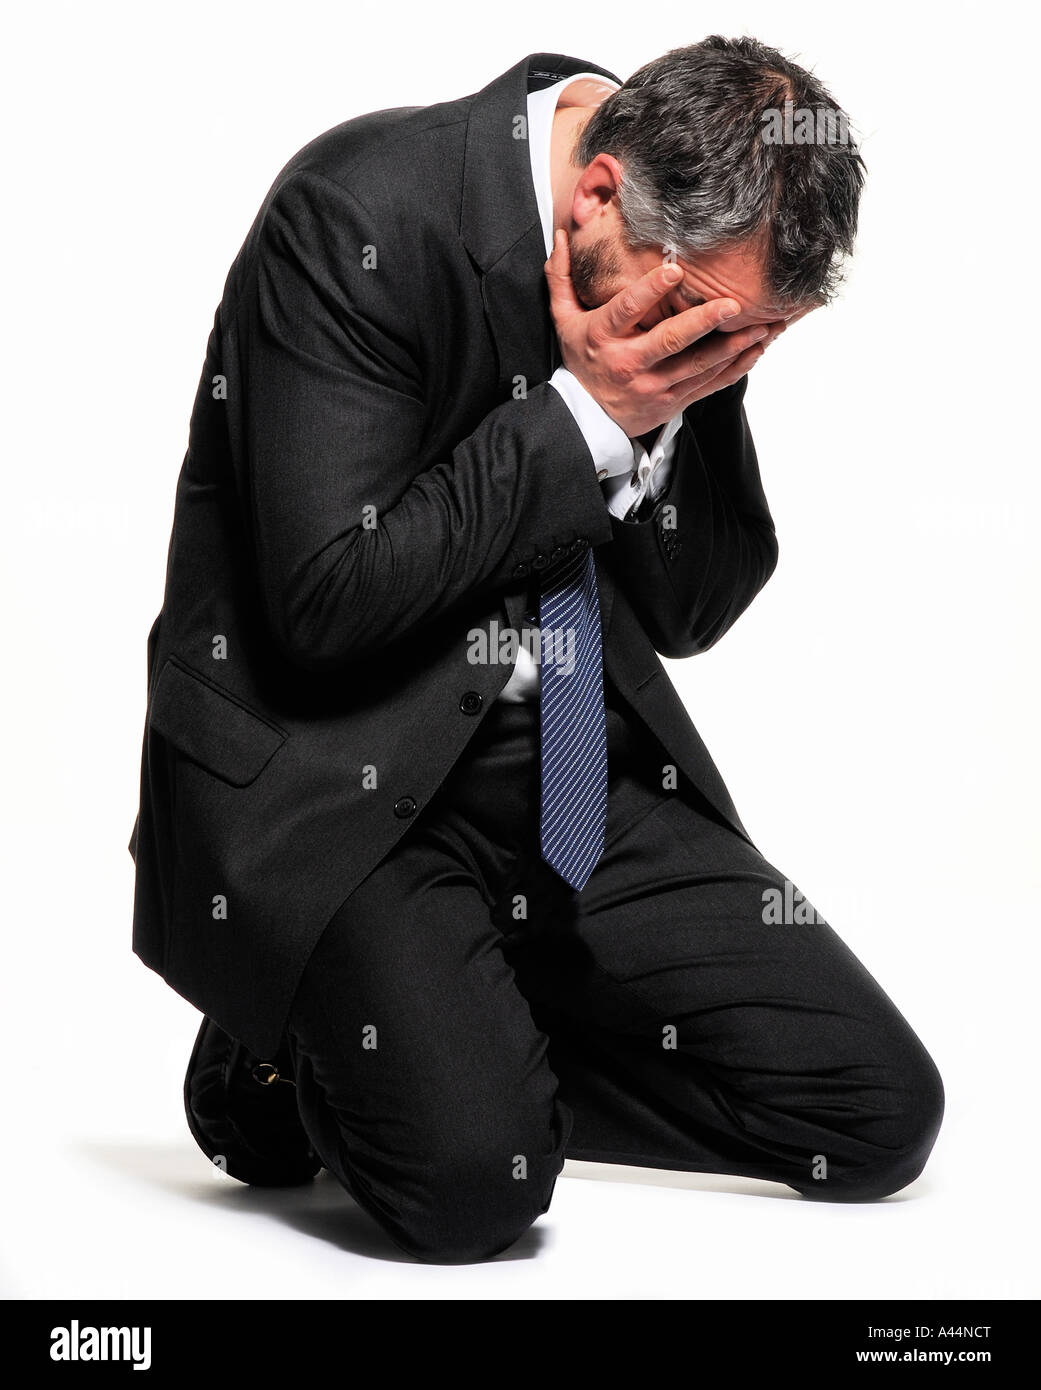 An emotional man sits holding his head with his hands. Picture by Patrick Steel patricksteel. Stock Photo